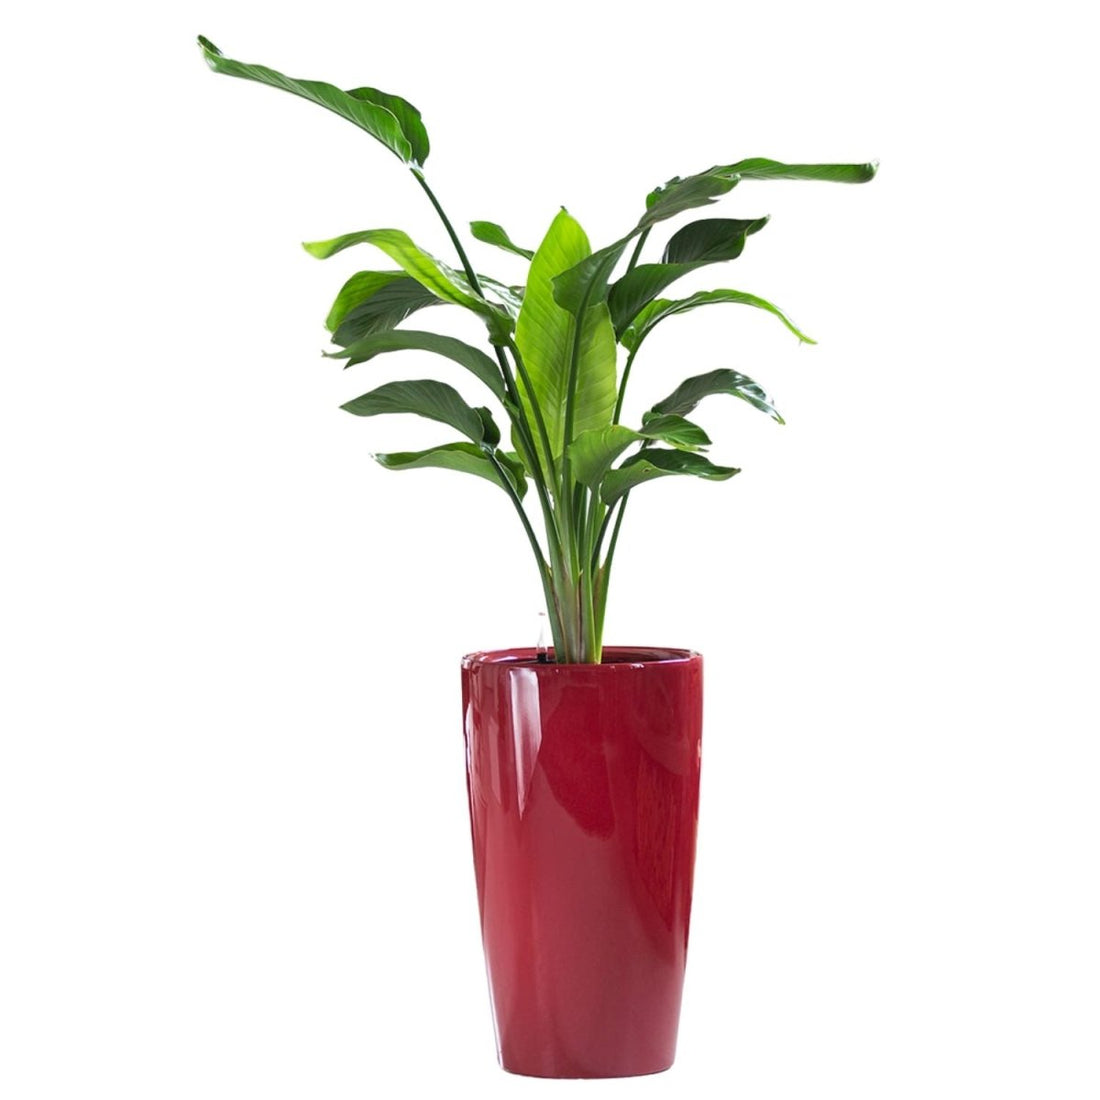 Bird of Paradise Plant Potted In Lechuza Rondo Planter - Red - My City Plants